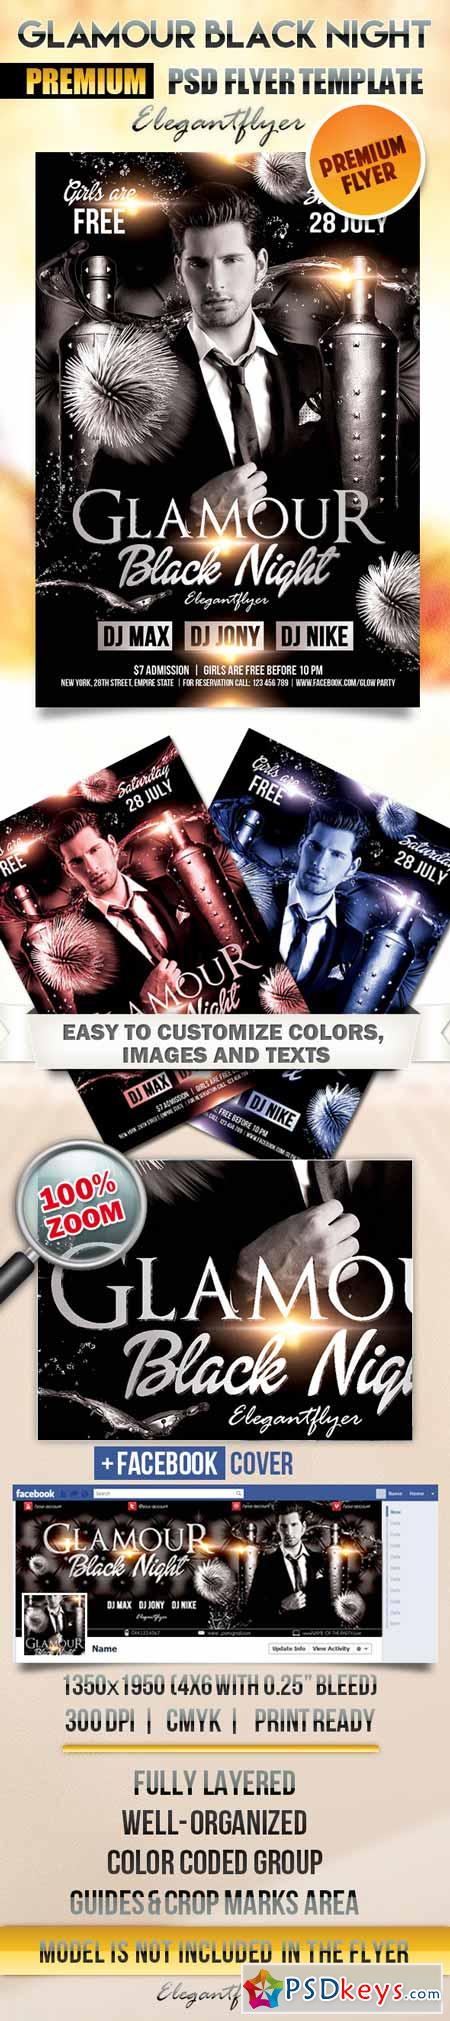 Glamour Black Night  Flyer PSD Template + Facebook Cover